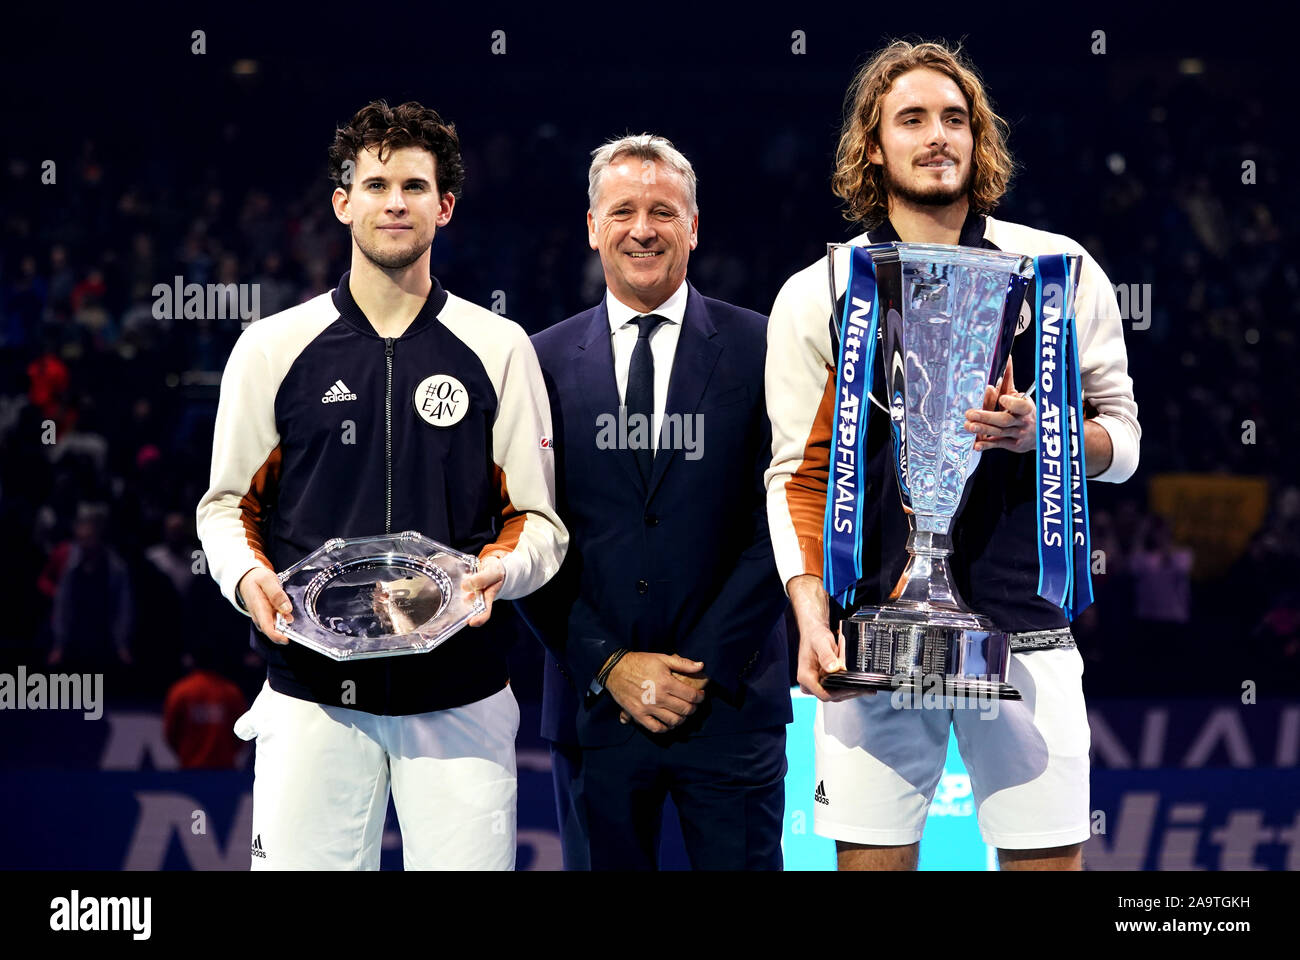 Stefanos Tsitsipas (right) celebrates with the trophy after victory against Dominic Thiem (left) in the singles final, alongside ATP Chairman Chris Kermode (centre) on day eight of the Nitto ATP Finals at